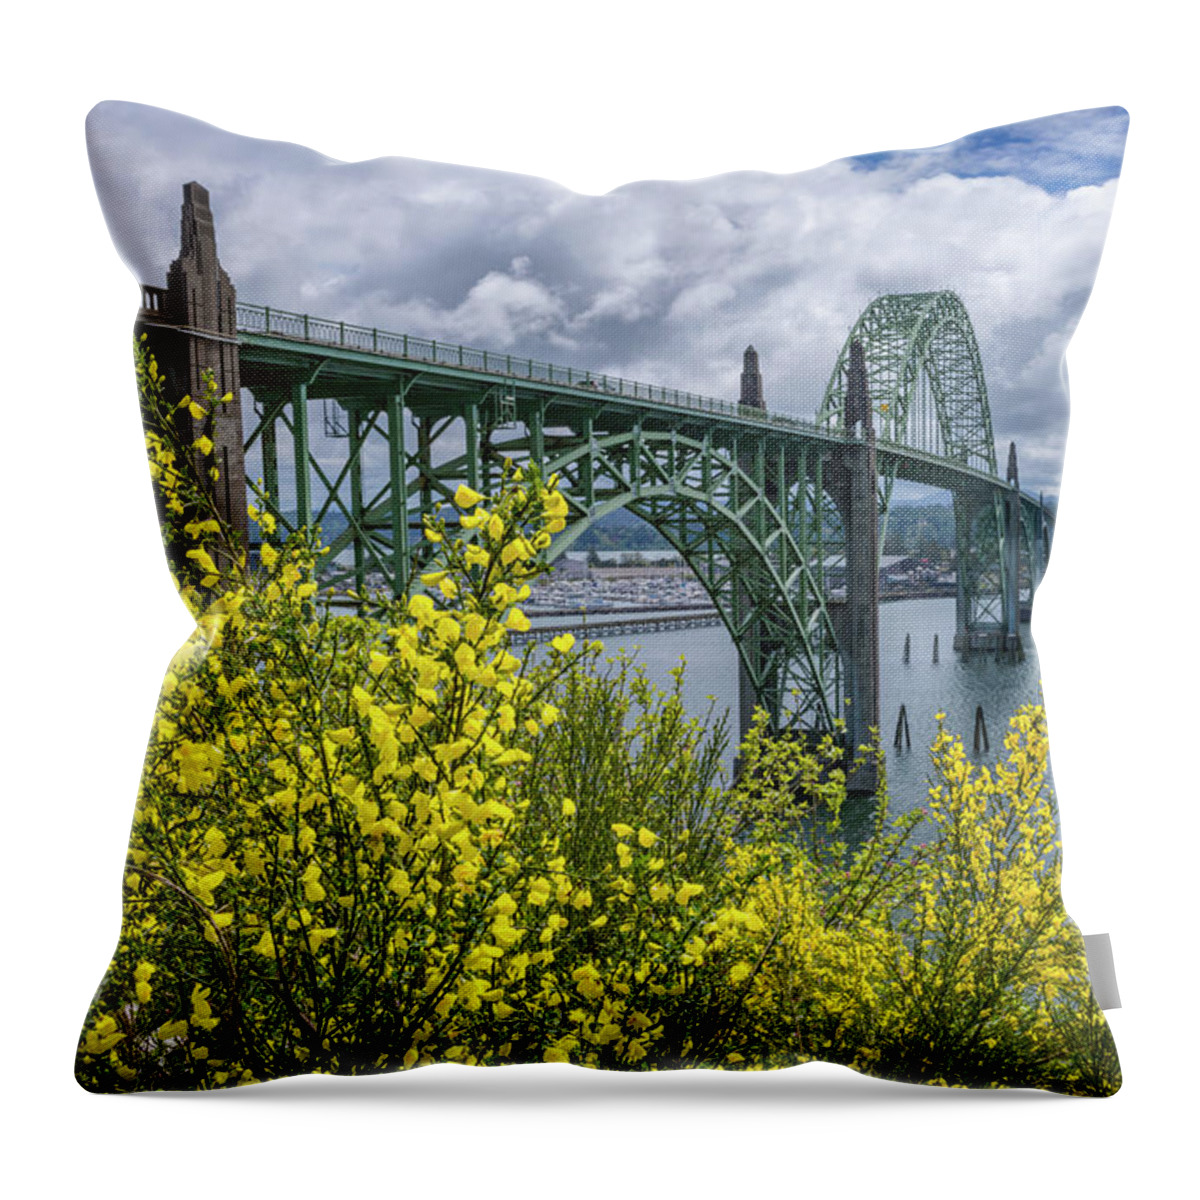 Newport Throw Pillow featuring the photograph Yaquina Bay Bridge Scotch Broom Blooms by Darren White